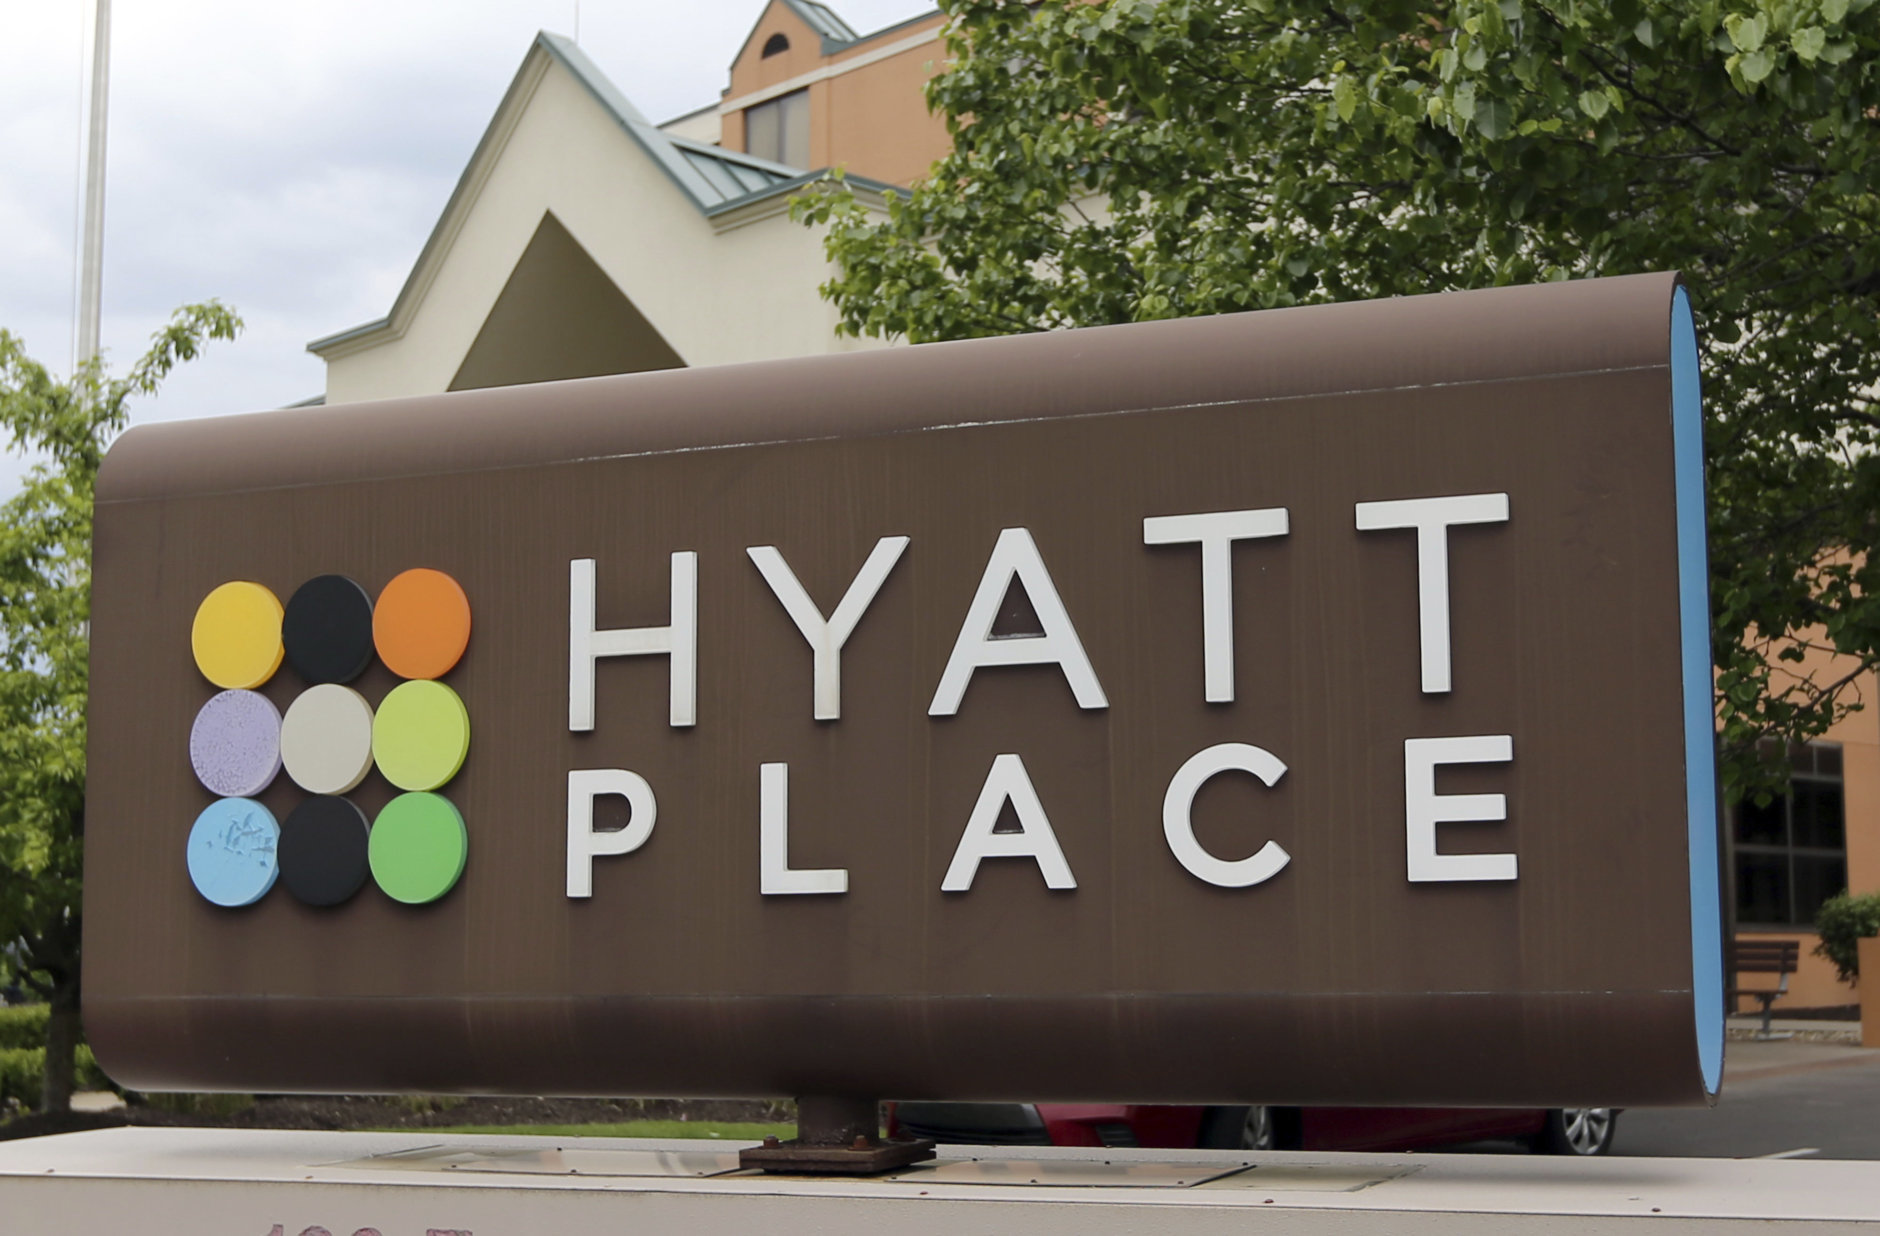 Signs for the Hyatt Place hotel mark its location on Thursday, May 4, 2017 in Carnberry, Pa., Butler County. (AP Photo/Keith Srakocic)